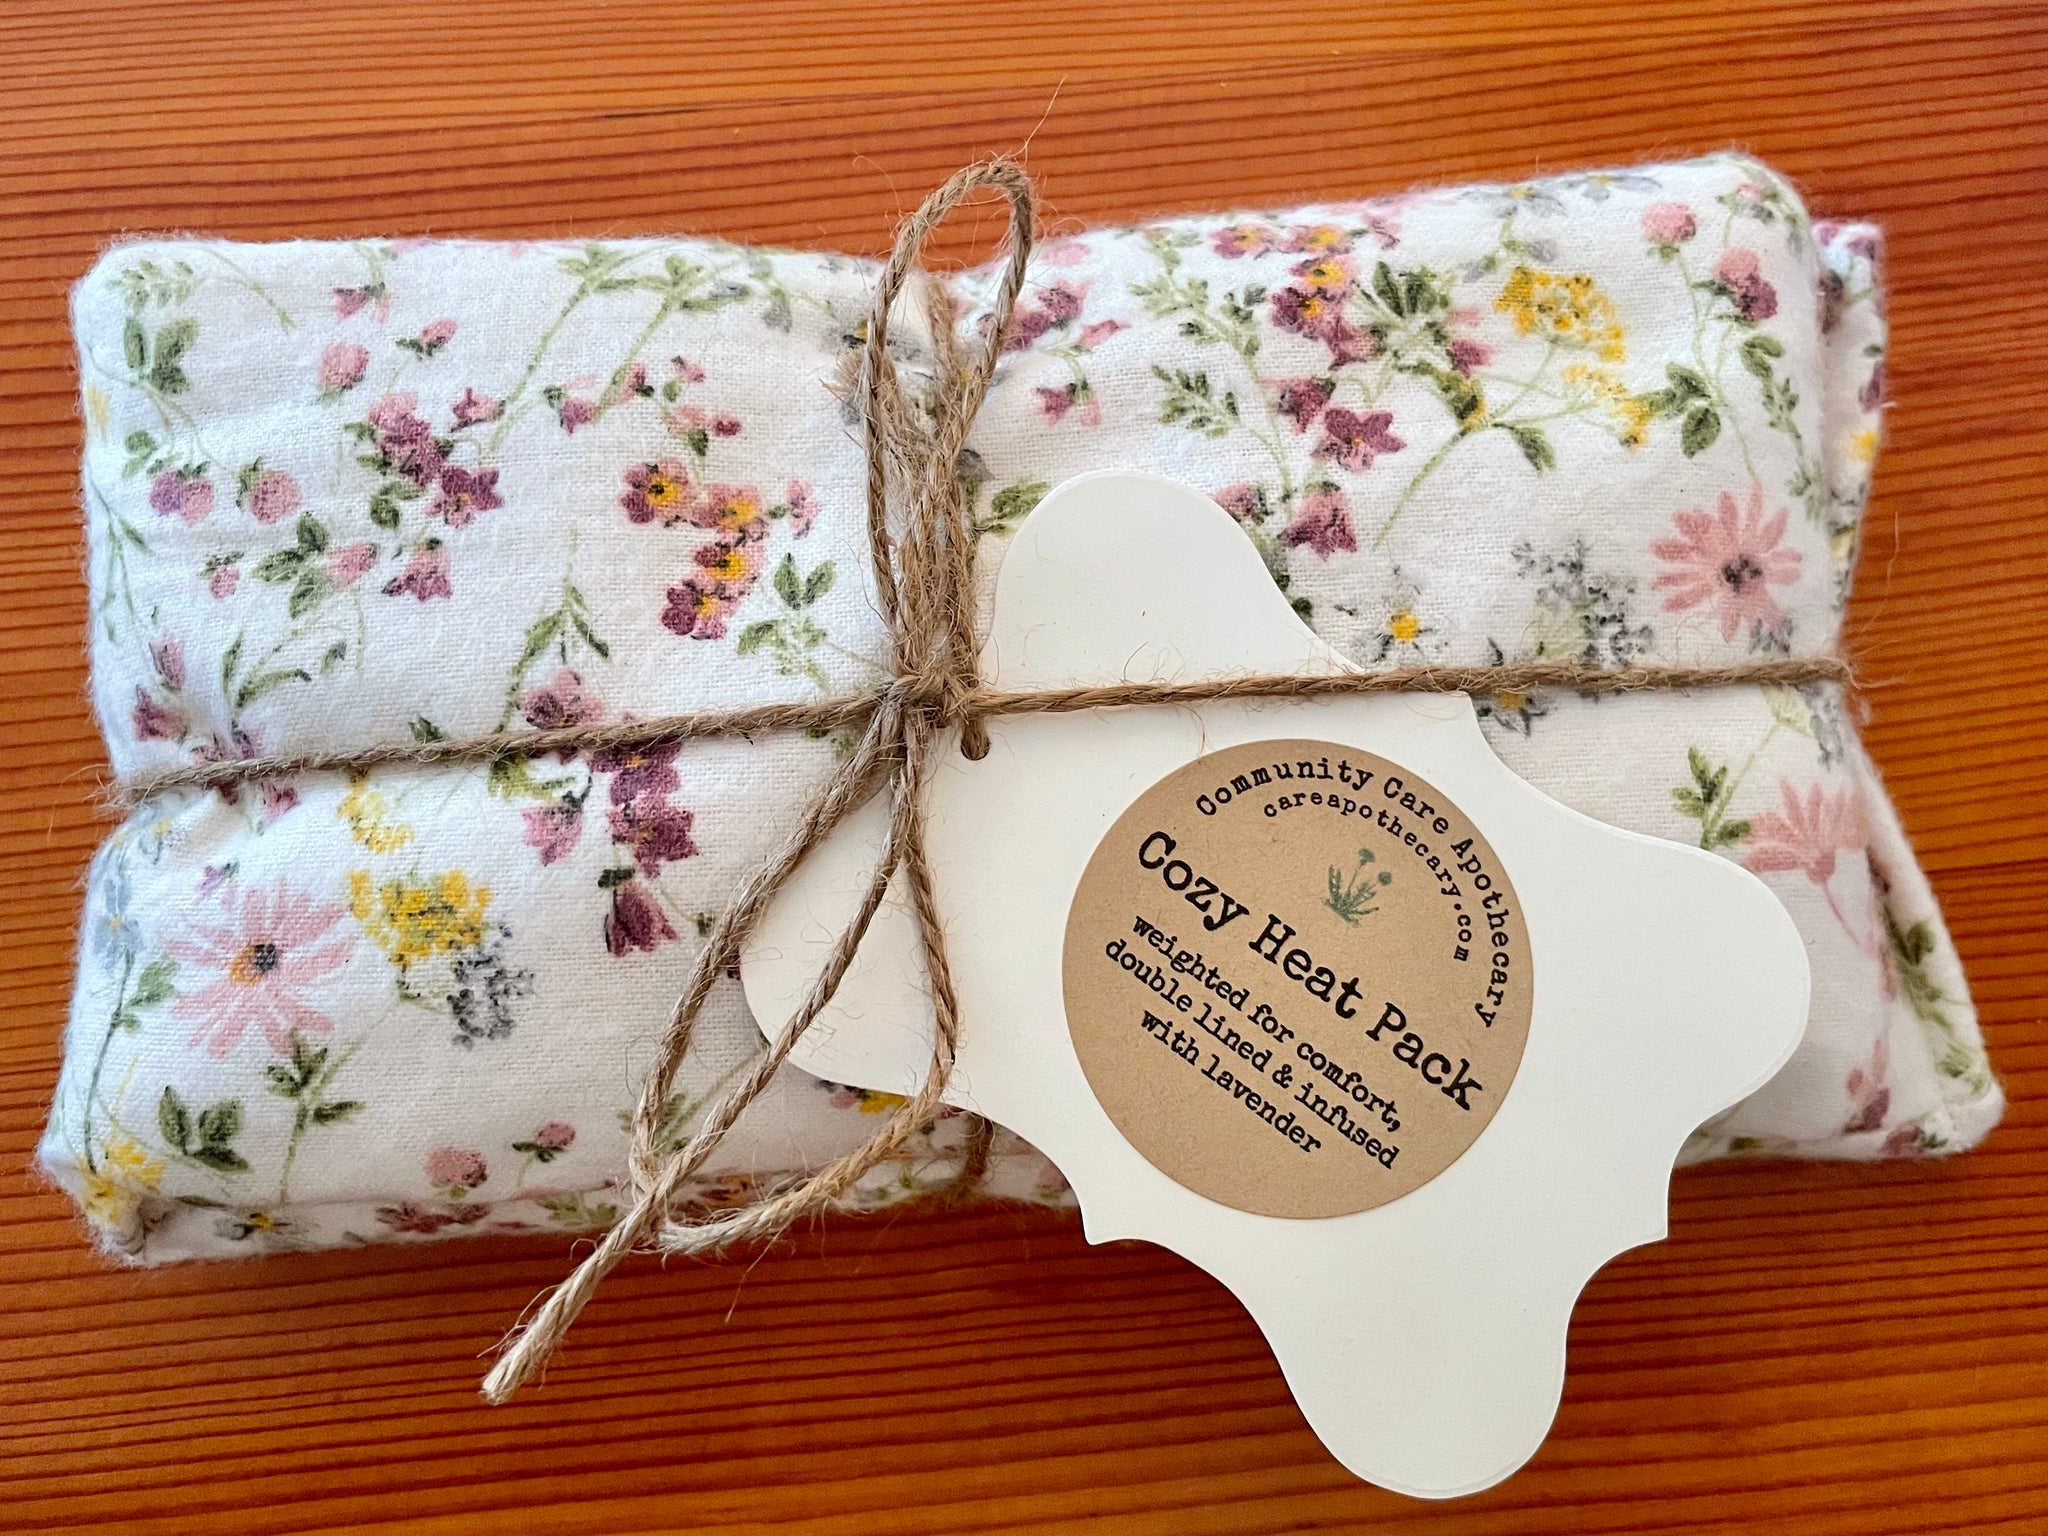 Cozy Heat Pack – Community Care Apothecary